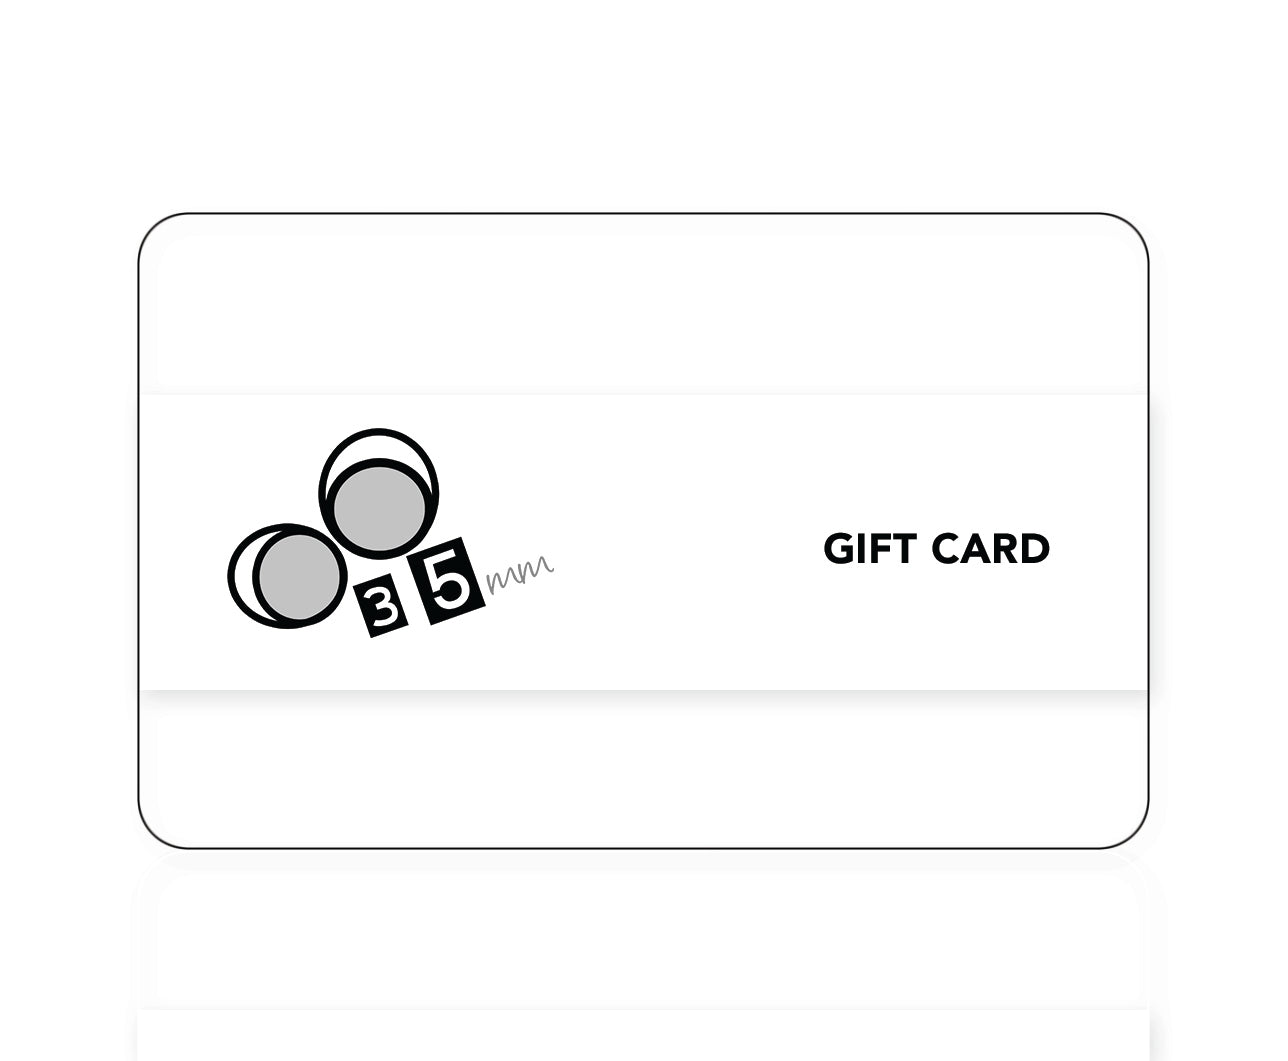 Online Gift Card Gift Card oo35mm   